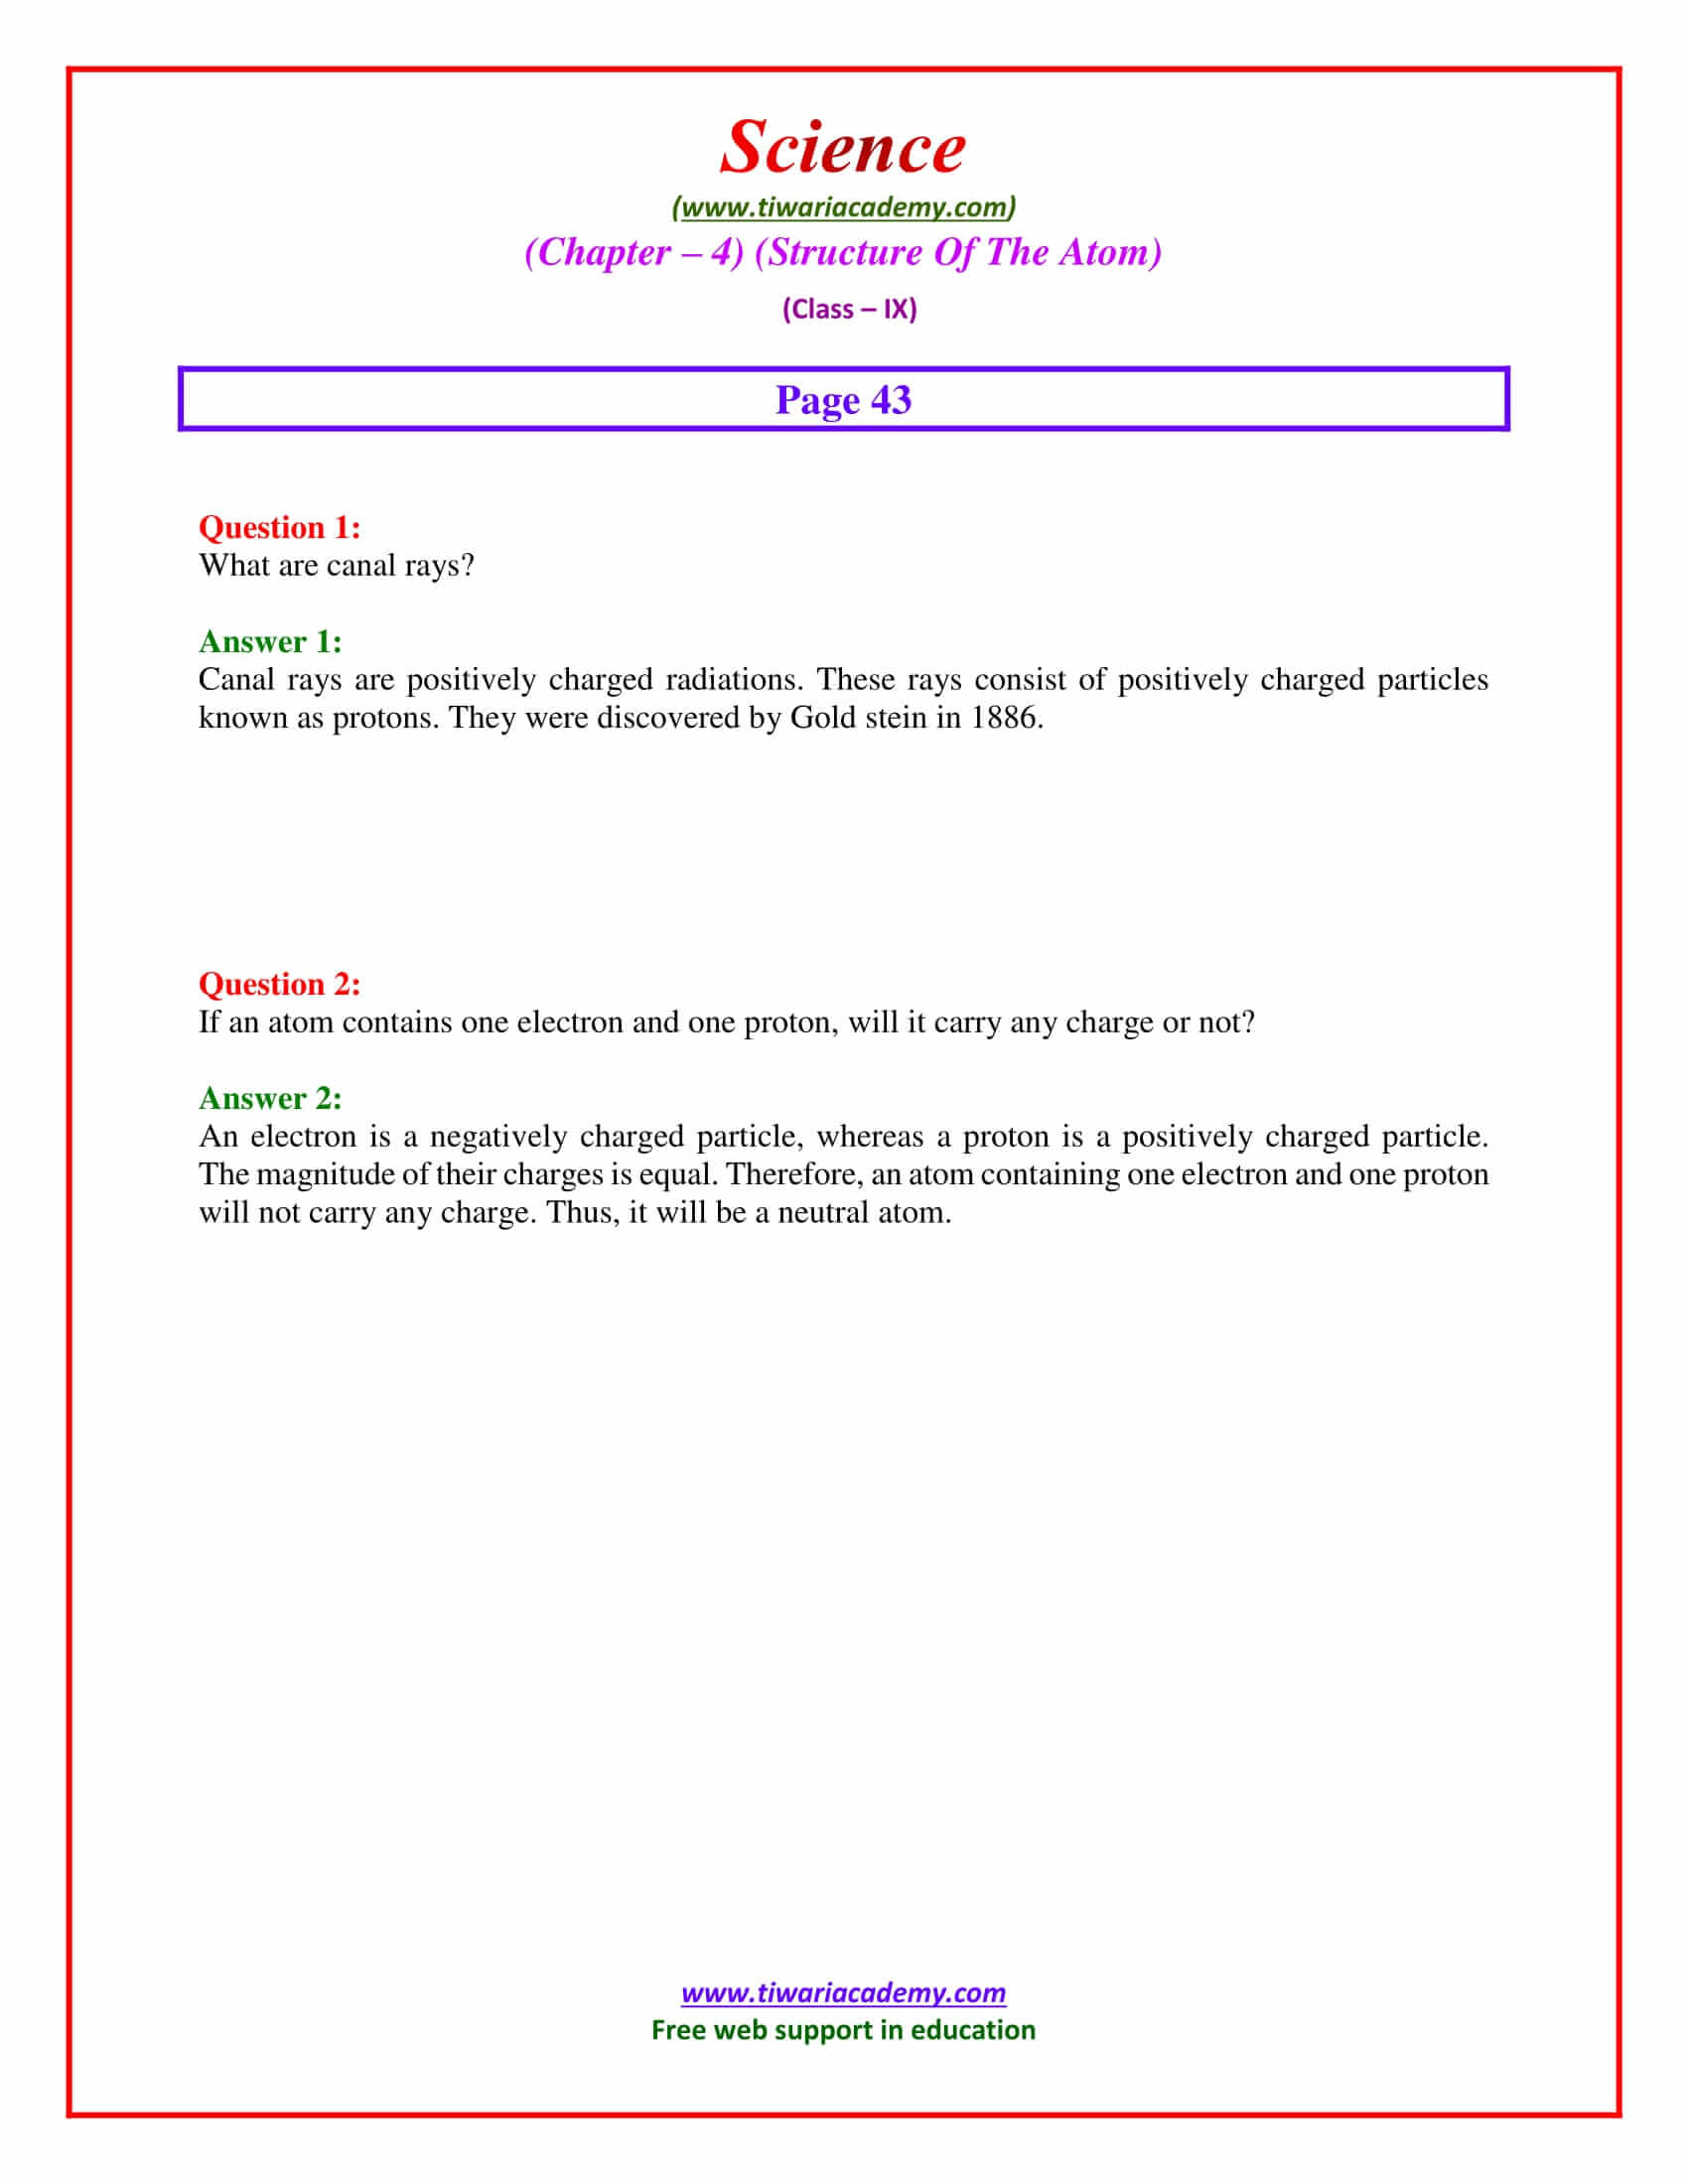 NCERT Solutions for Class 9 Science Chapter 4 Structure of the Atom intext questions page 43